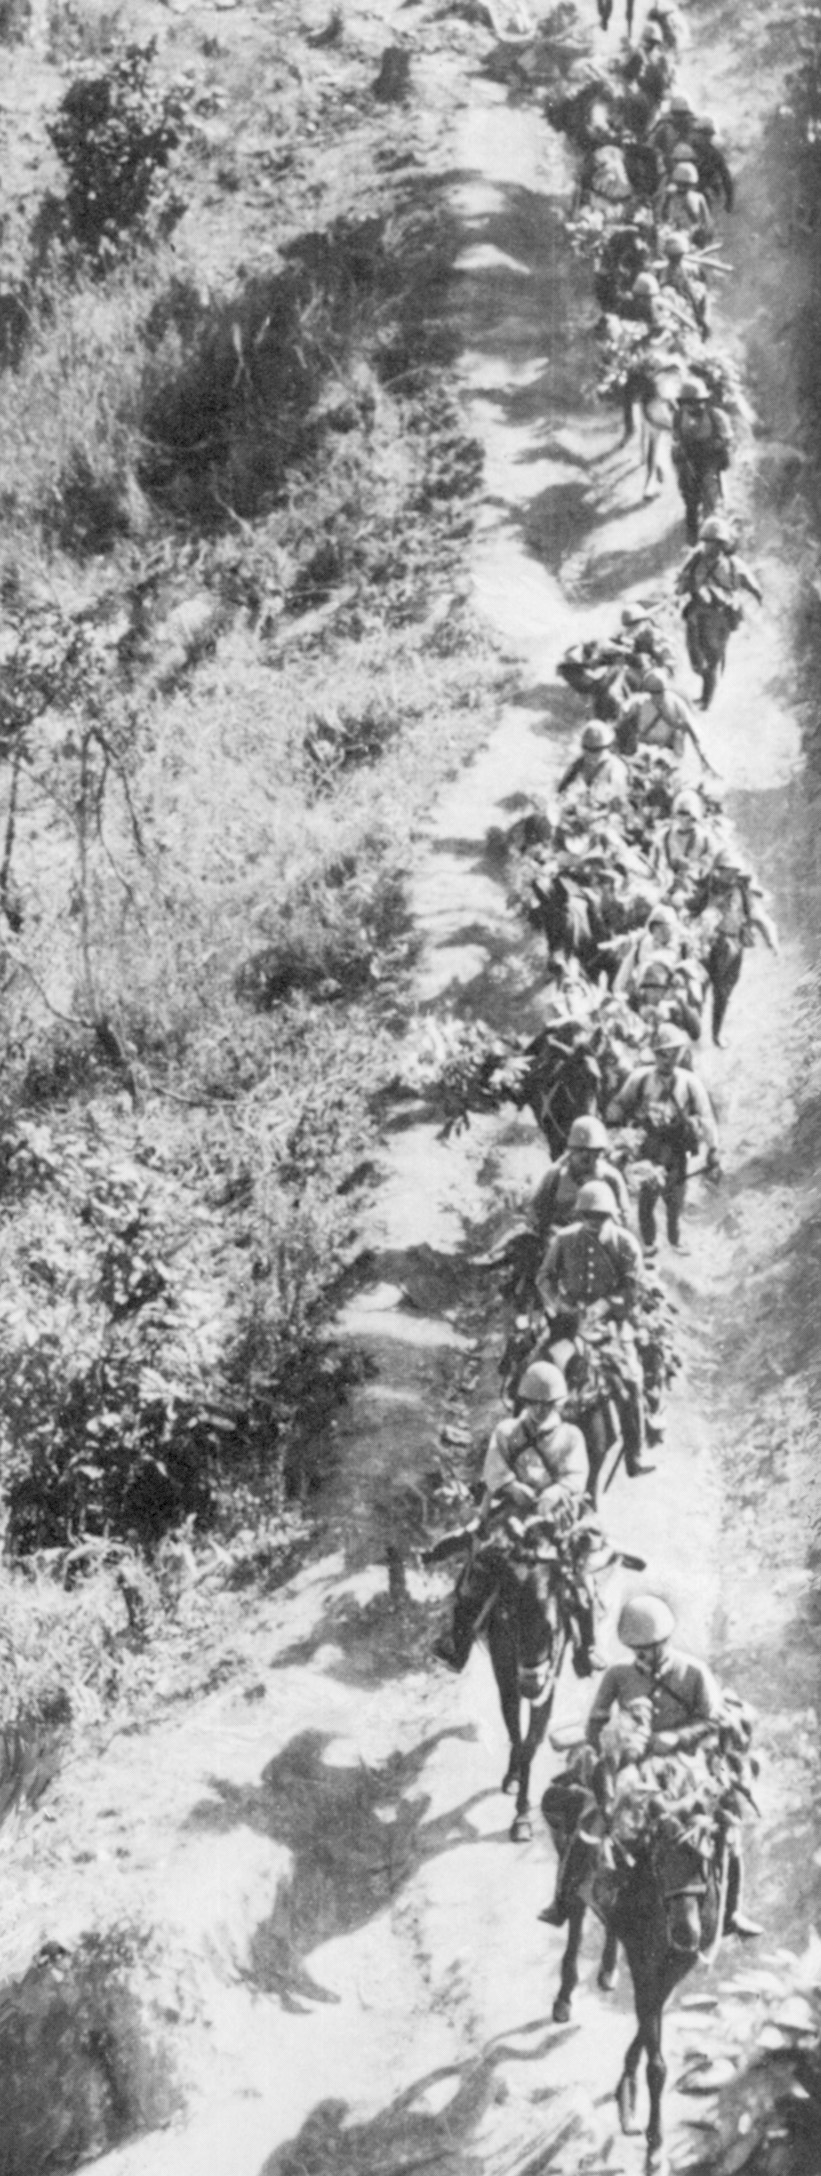 Japanese cavalrymen, some without mounts, traverse a dusty road during their advance toward Kohima and Imphal in 1944. Losses among the horses were said to be greater than two-thirds.